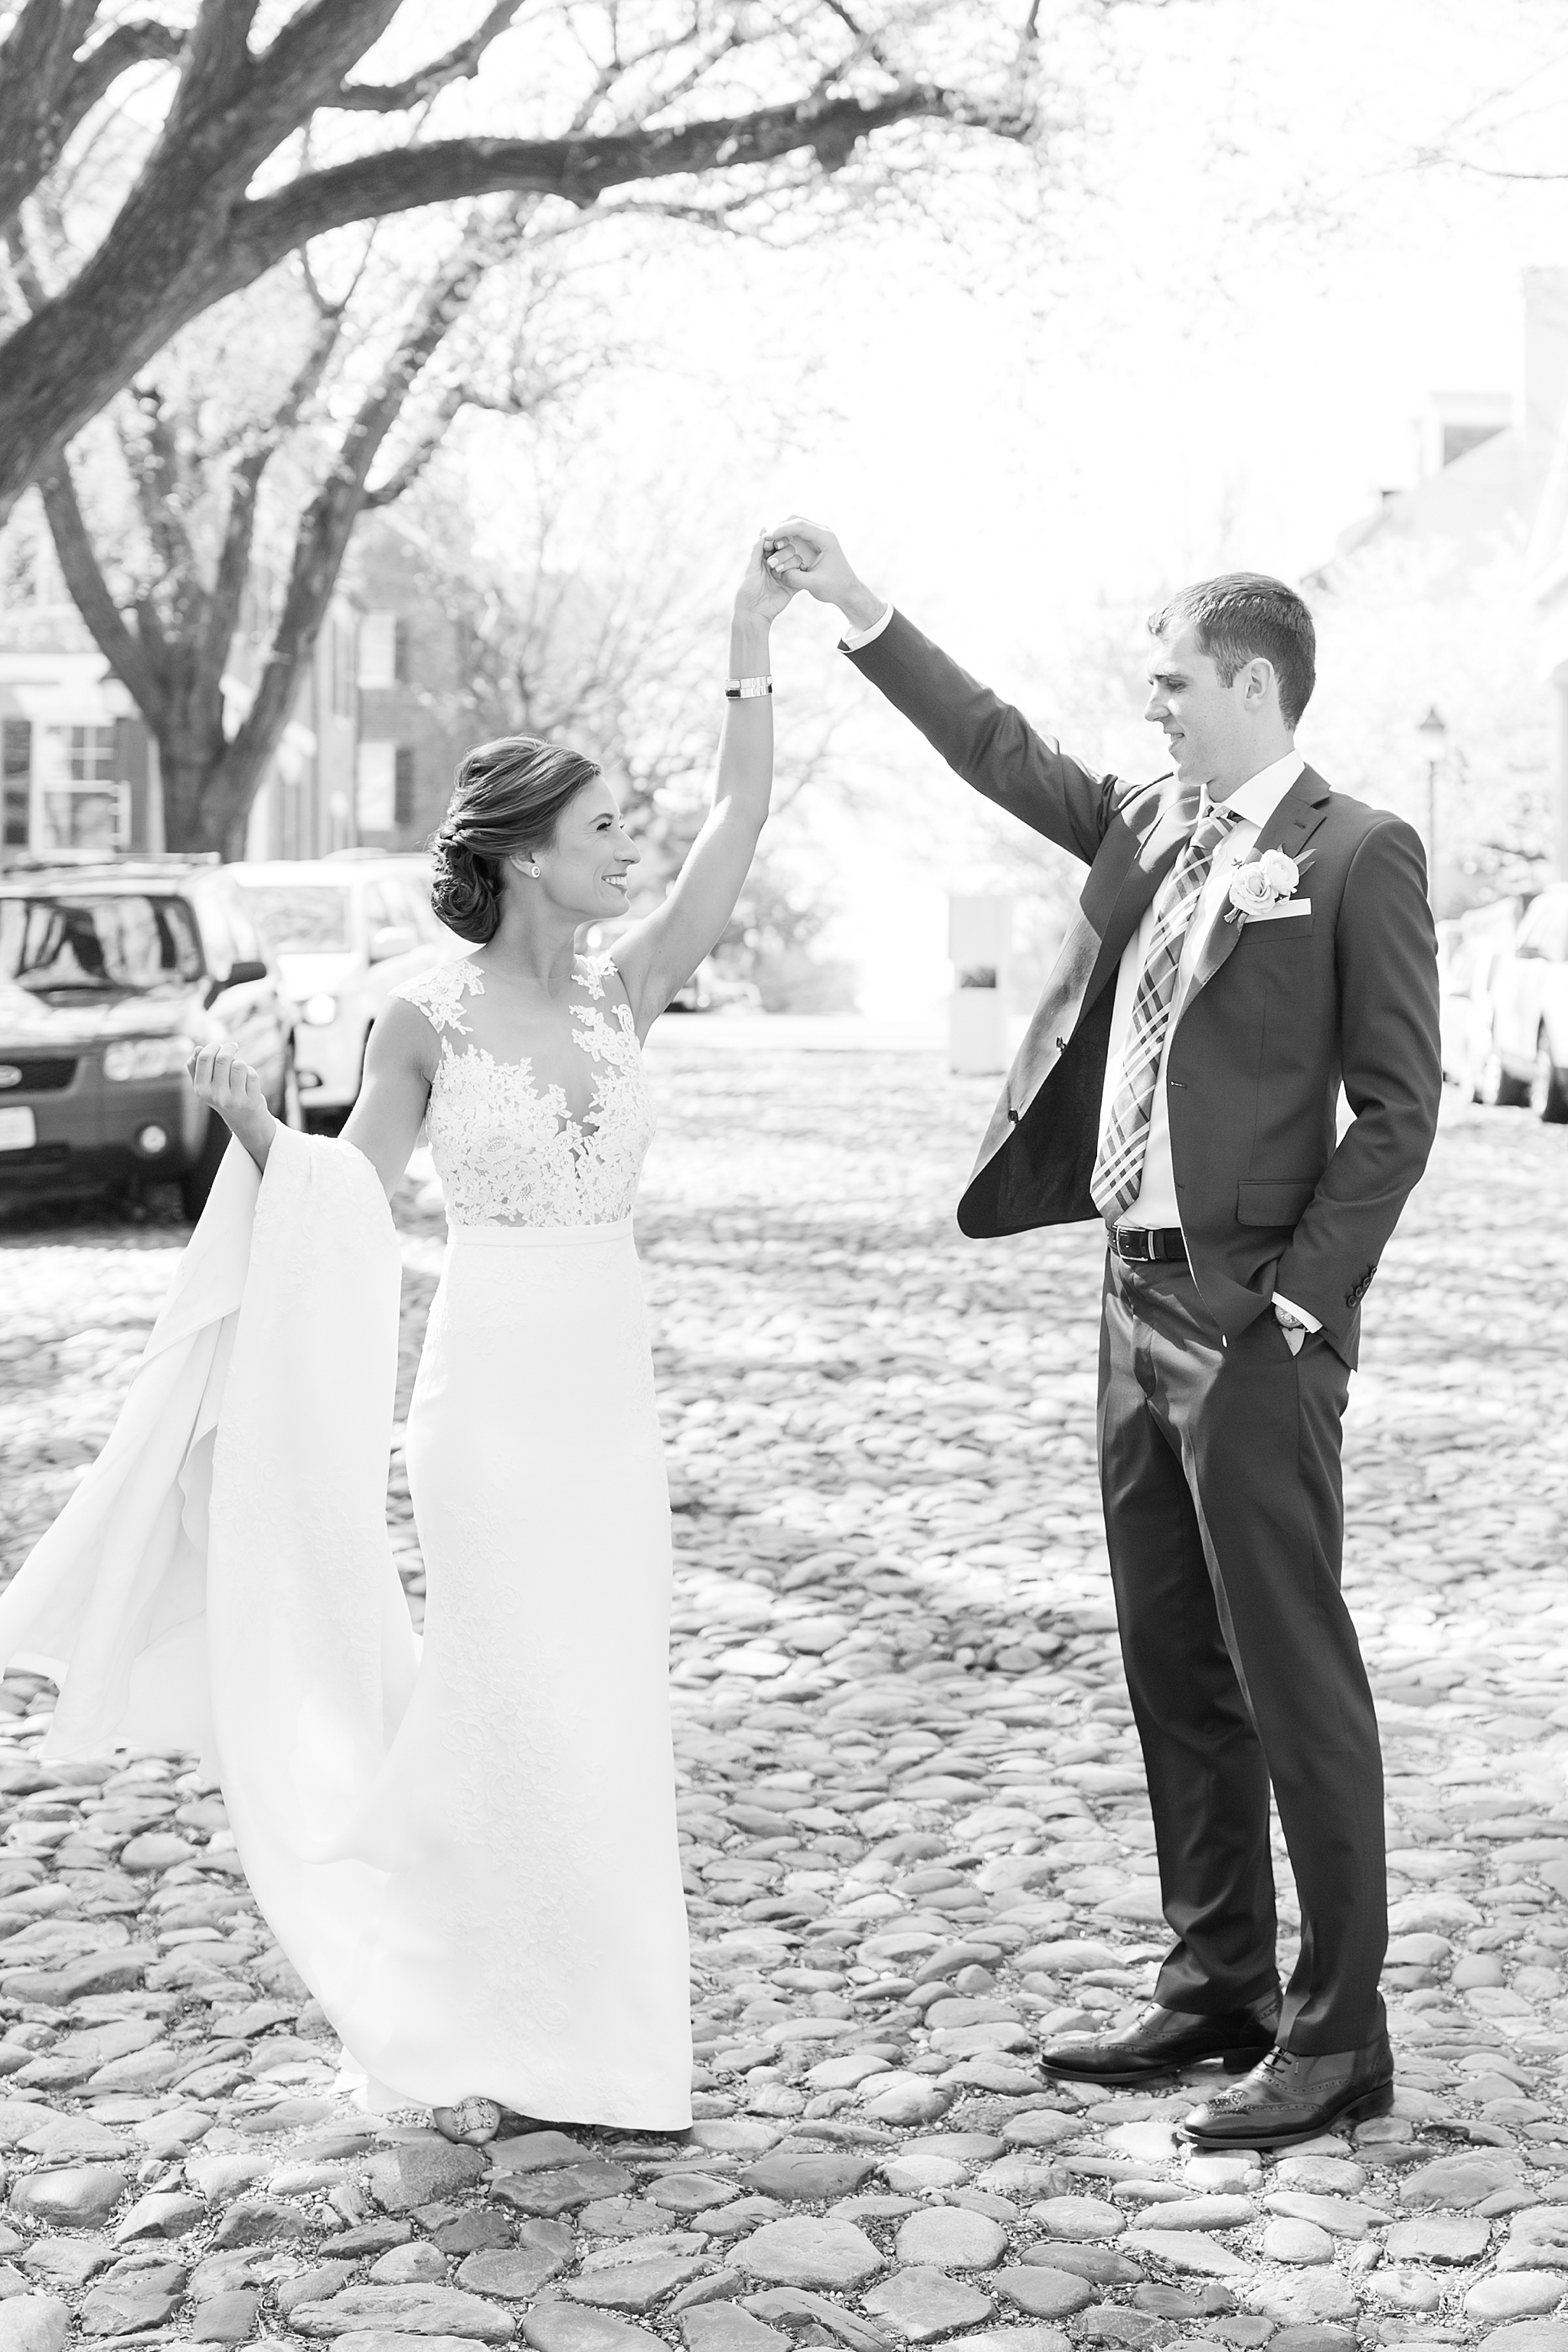 A beautiful spring wedding at the Westin Hotel in Alexandria, VA with portraits around Old Town.